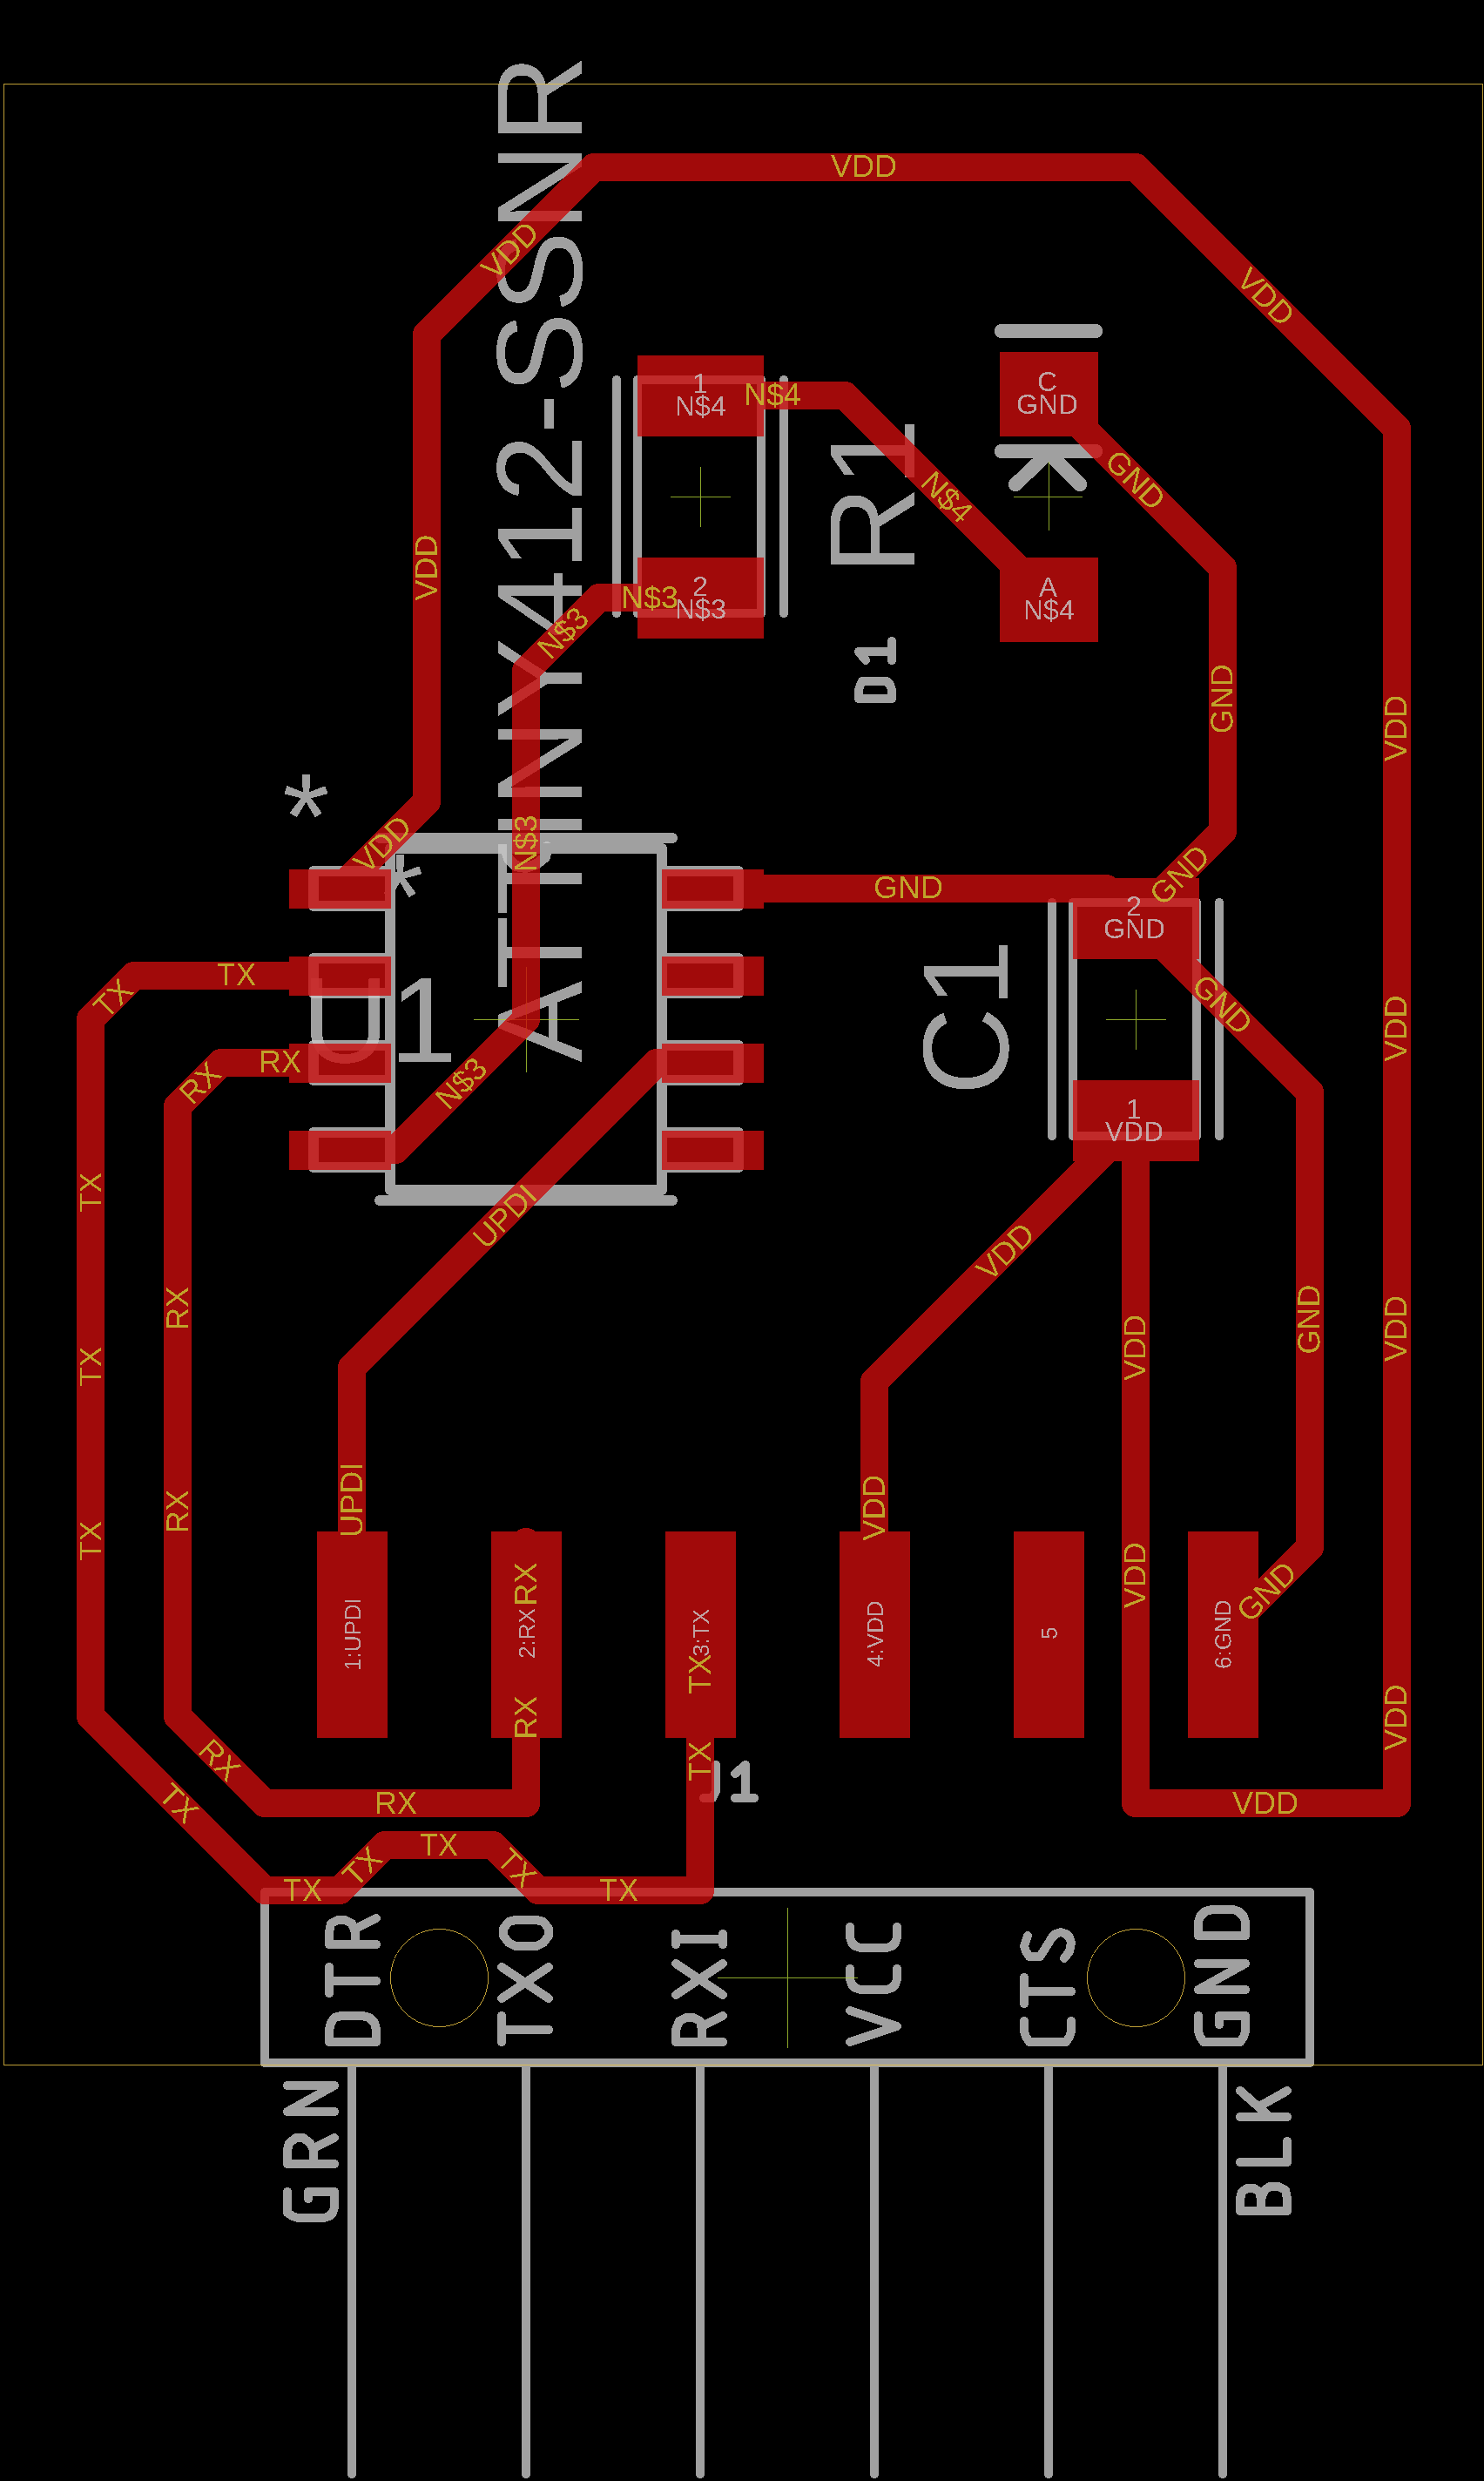 The serial board layout.